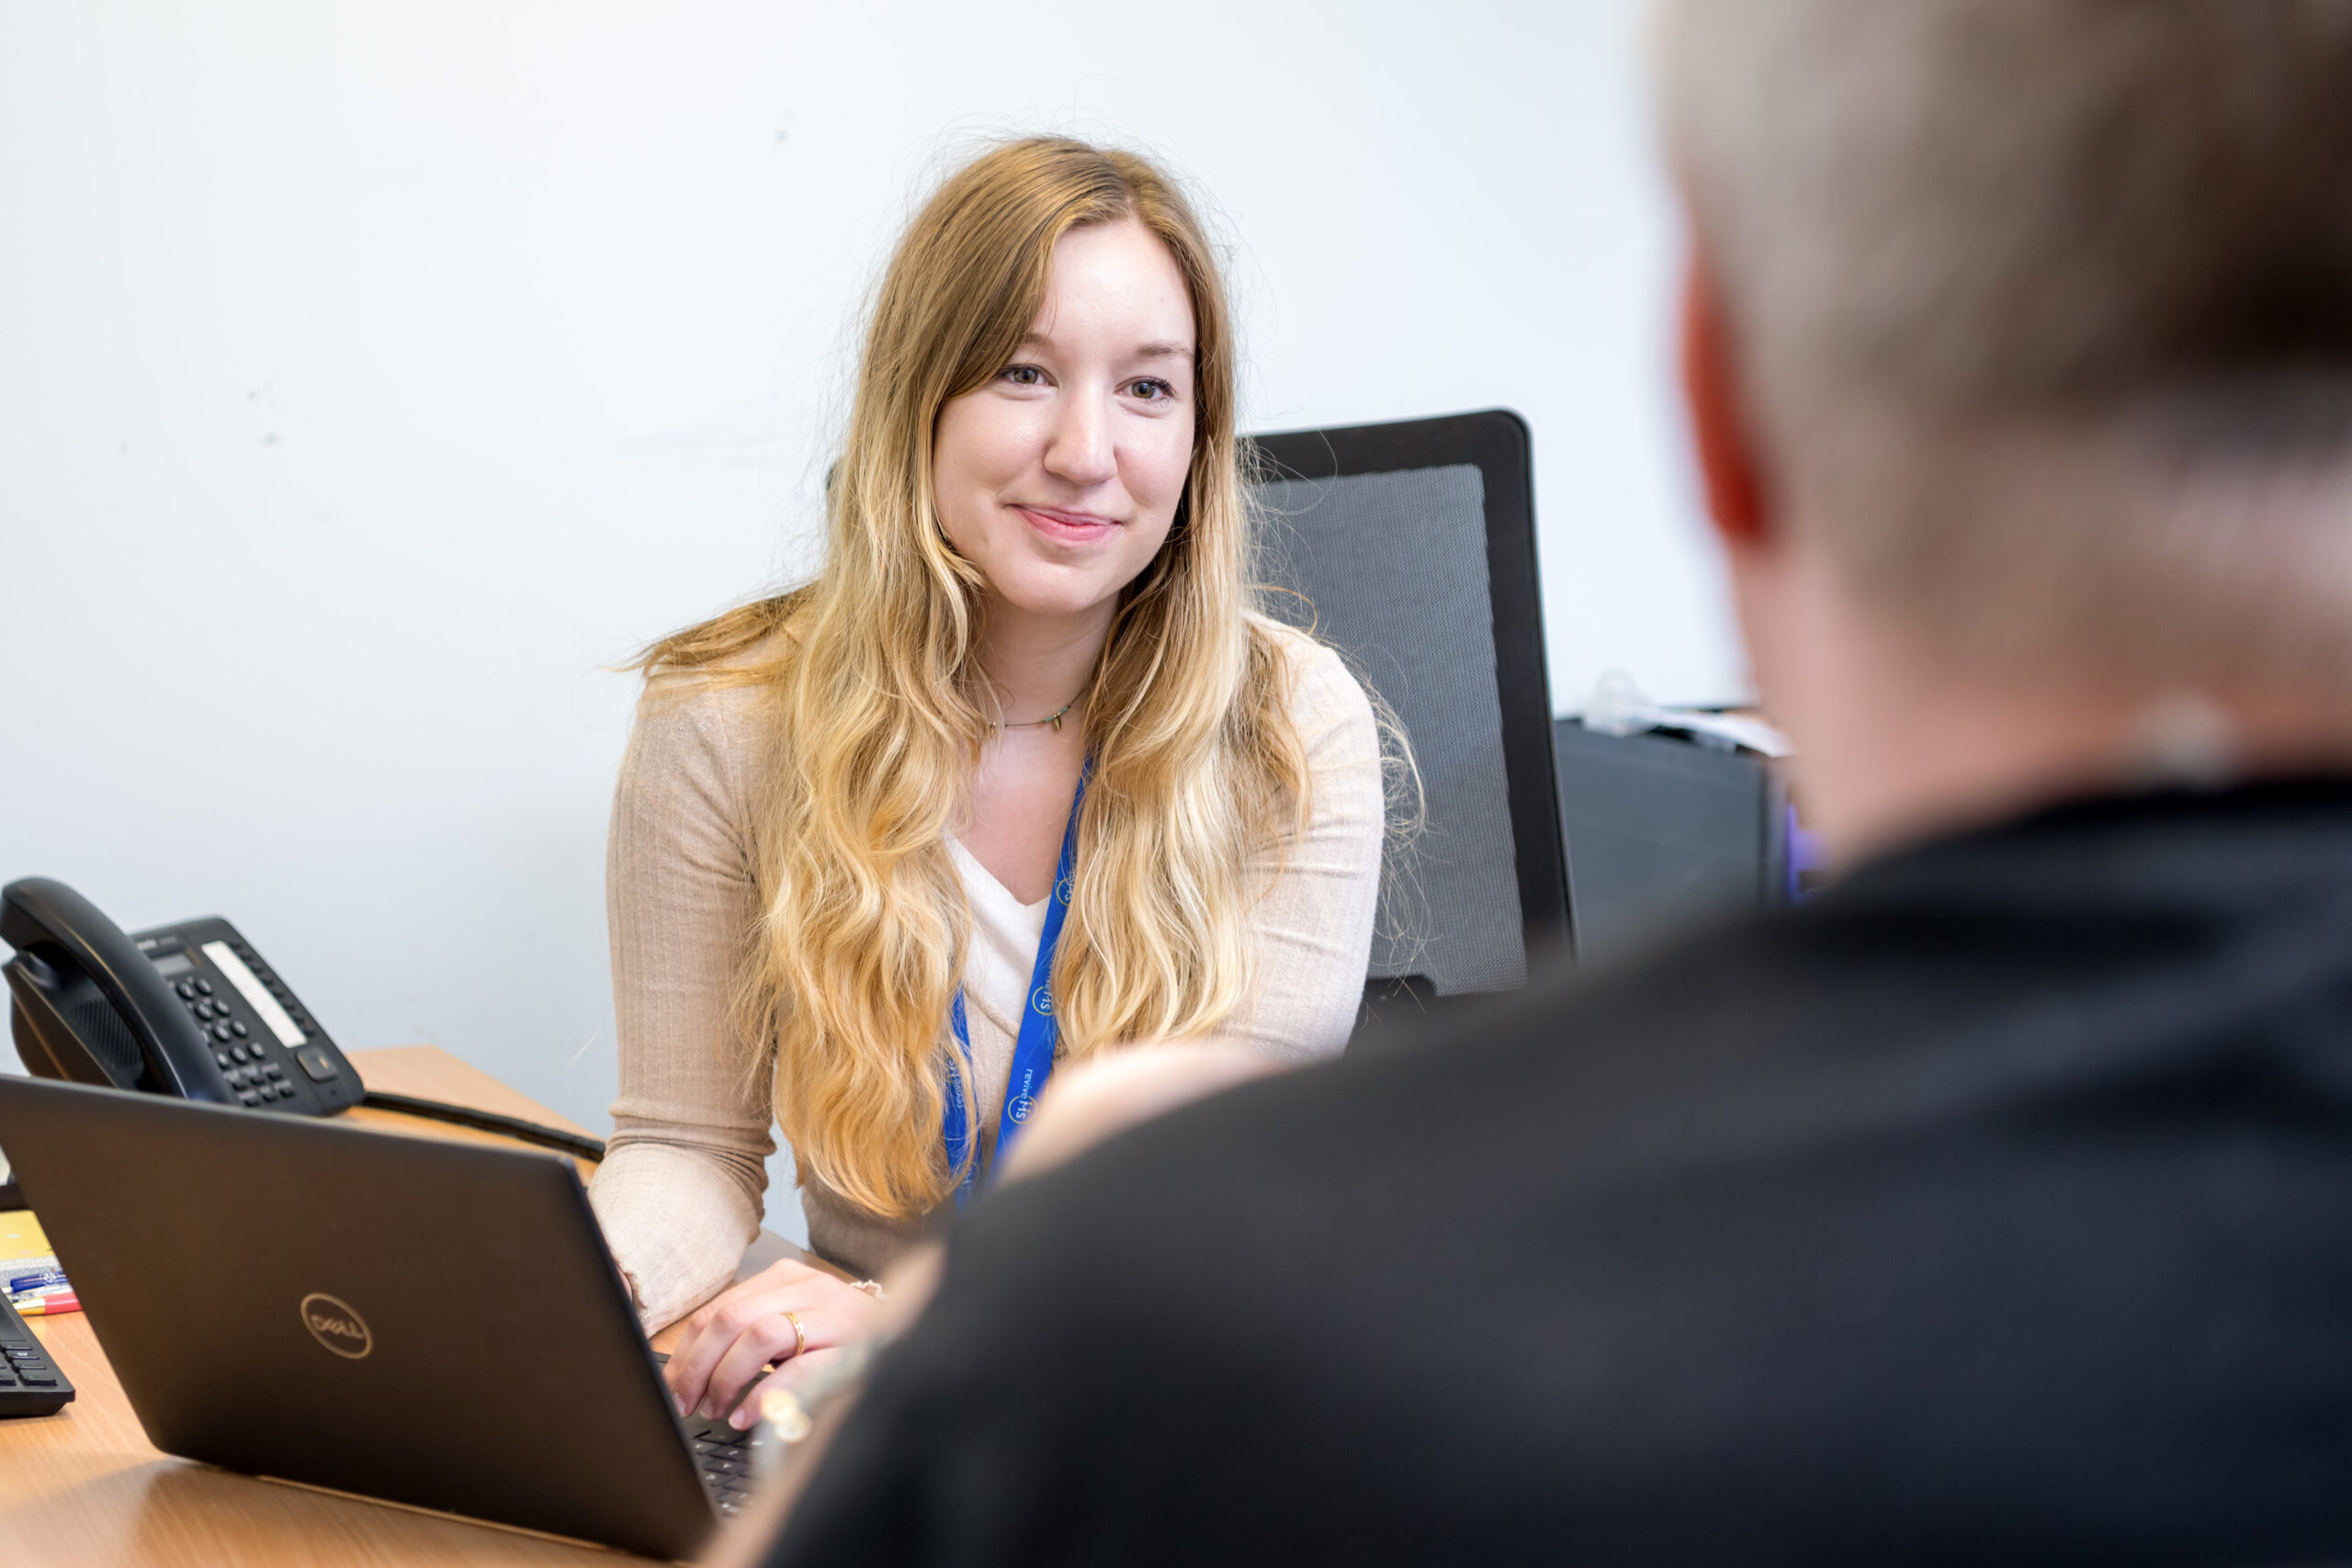 A young woman with long blond hair and a cream top is speaking to a man who has his back to the camera. She is taking notes on a laptop and smiling gently.